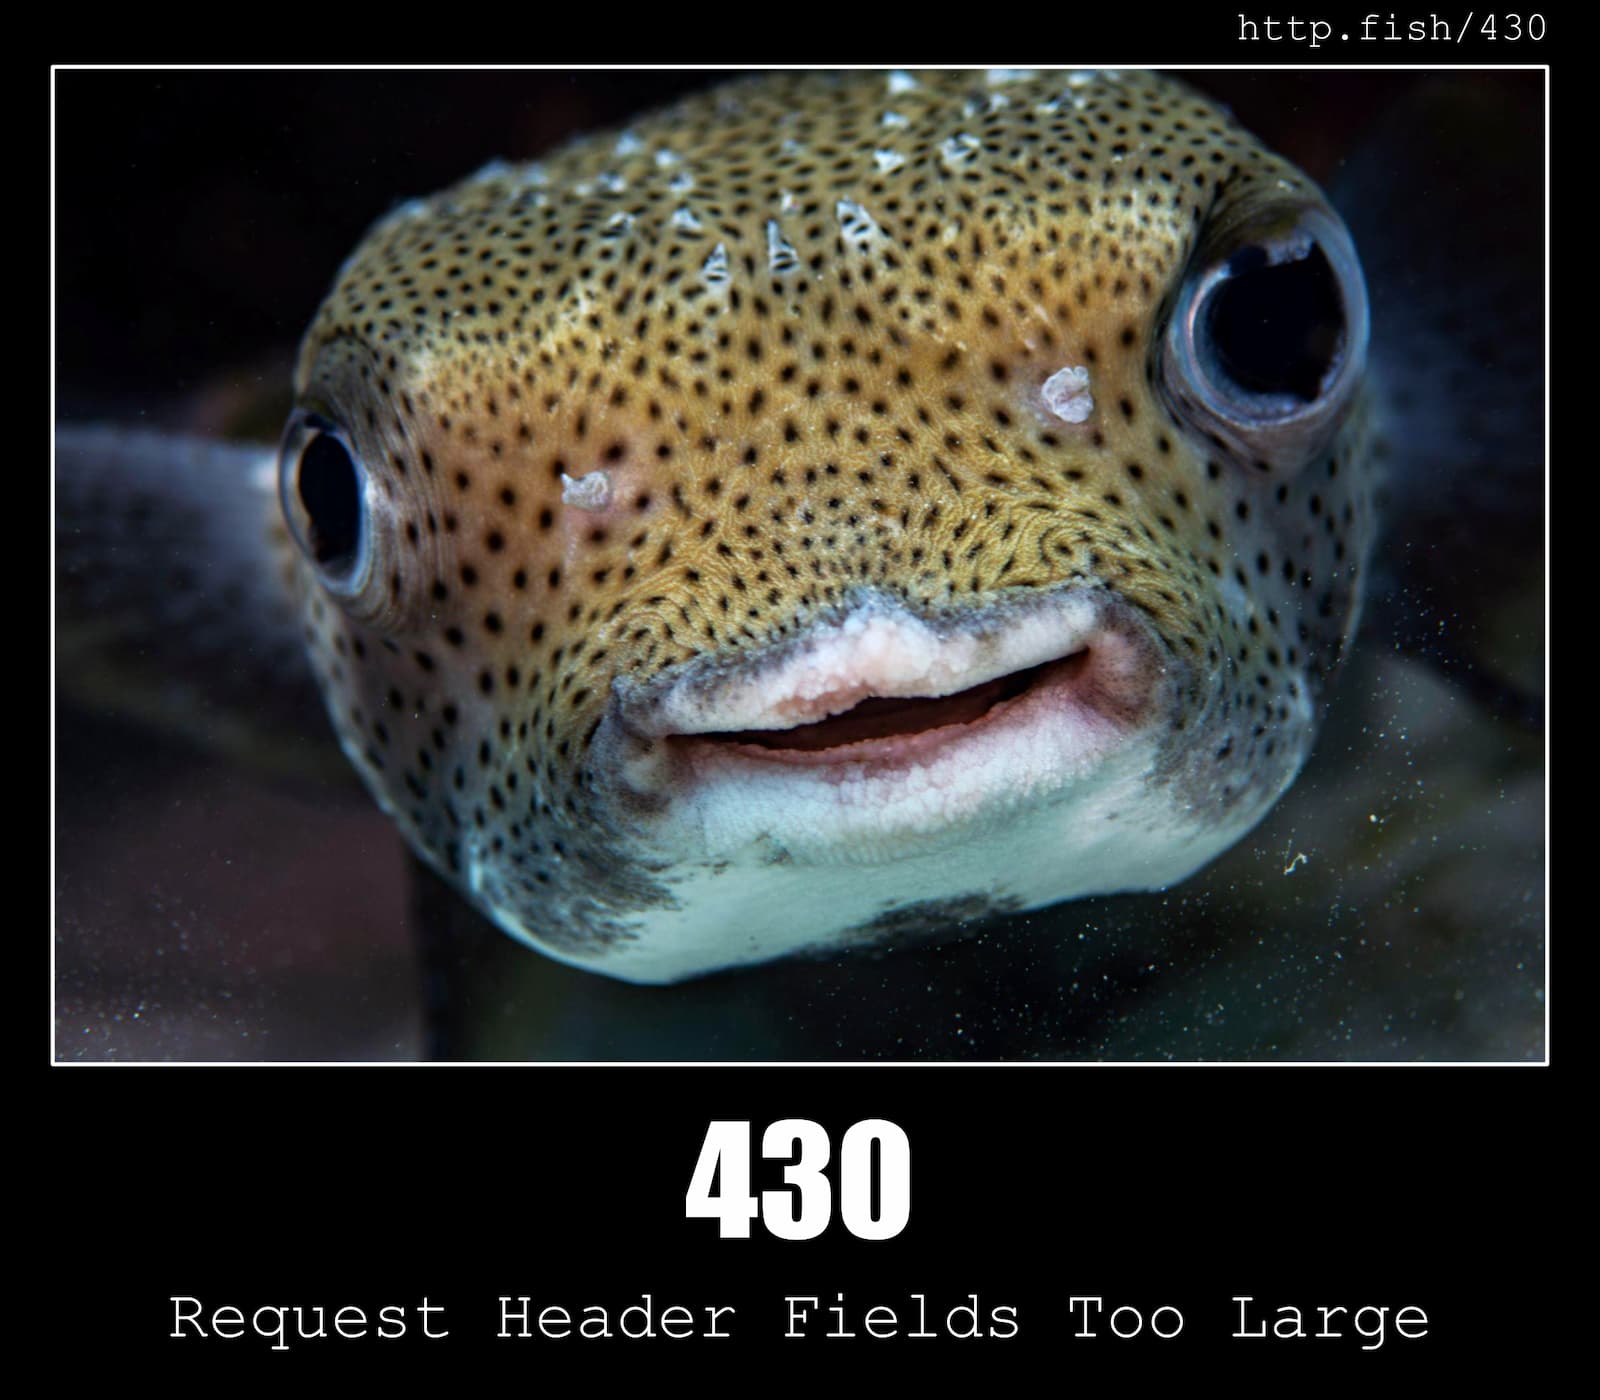 HTTP Status Code 430 Request Header Fields Too Large & Fish